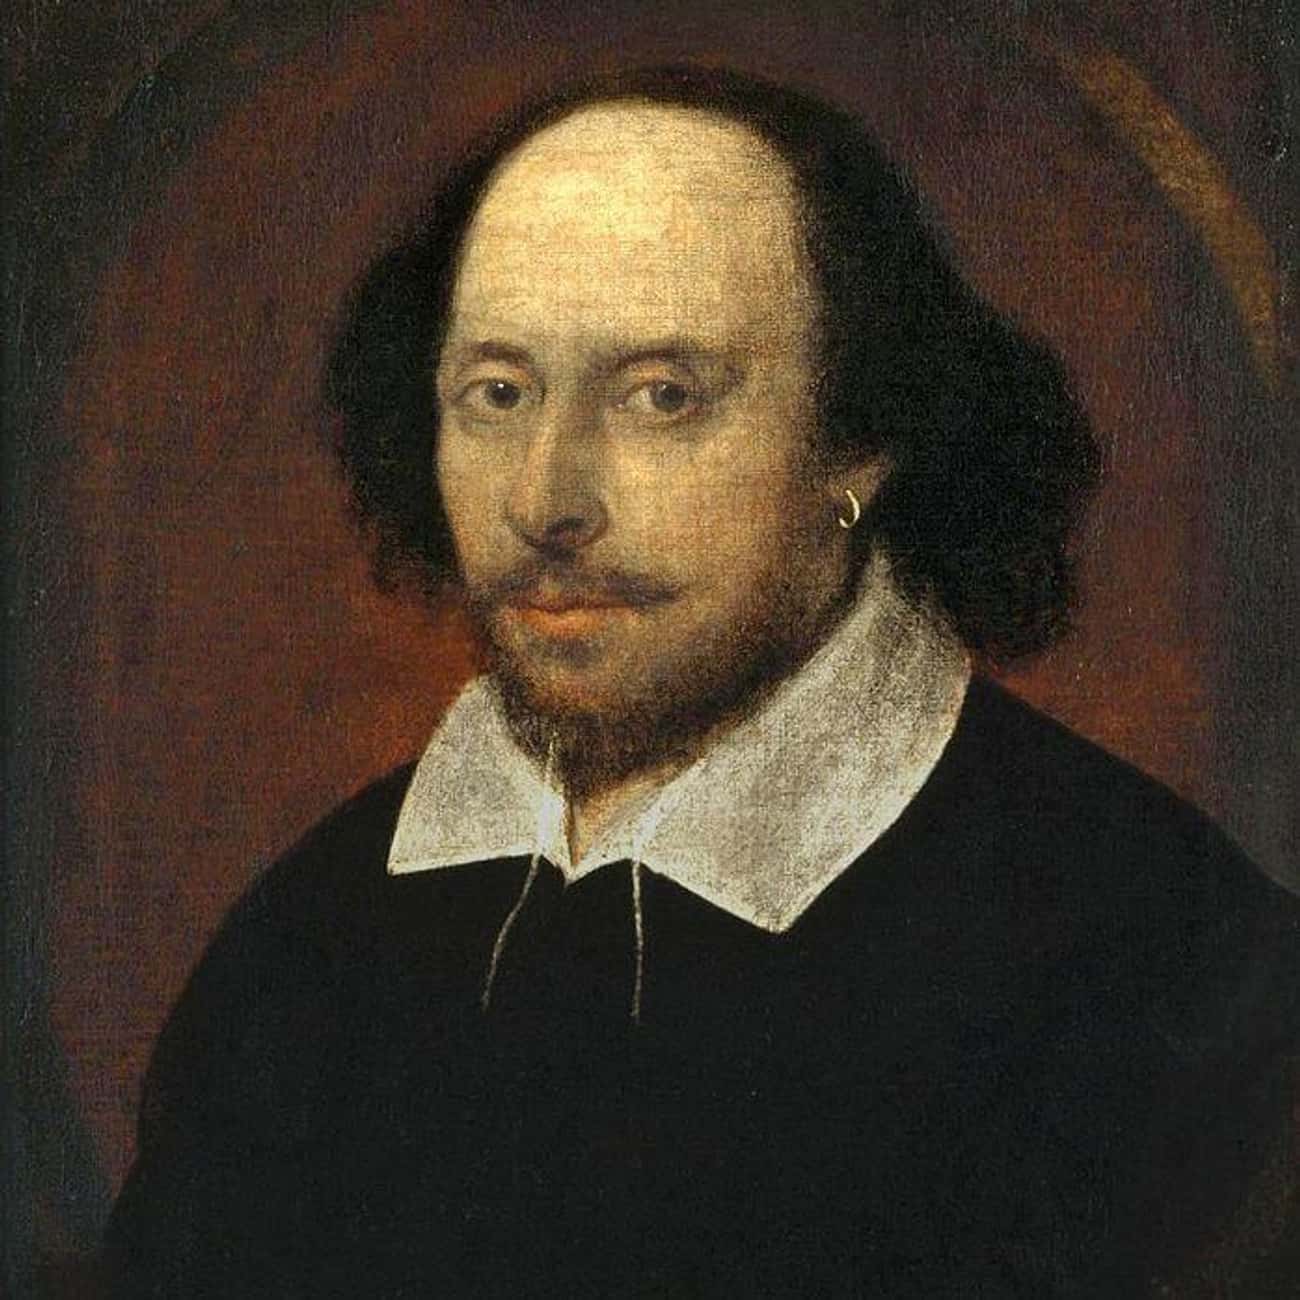 William Shakespeare Specifically Referred To Syphilis In His Plays And Sonnets